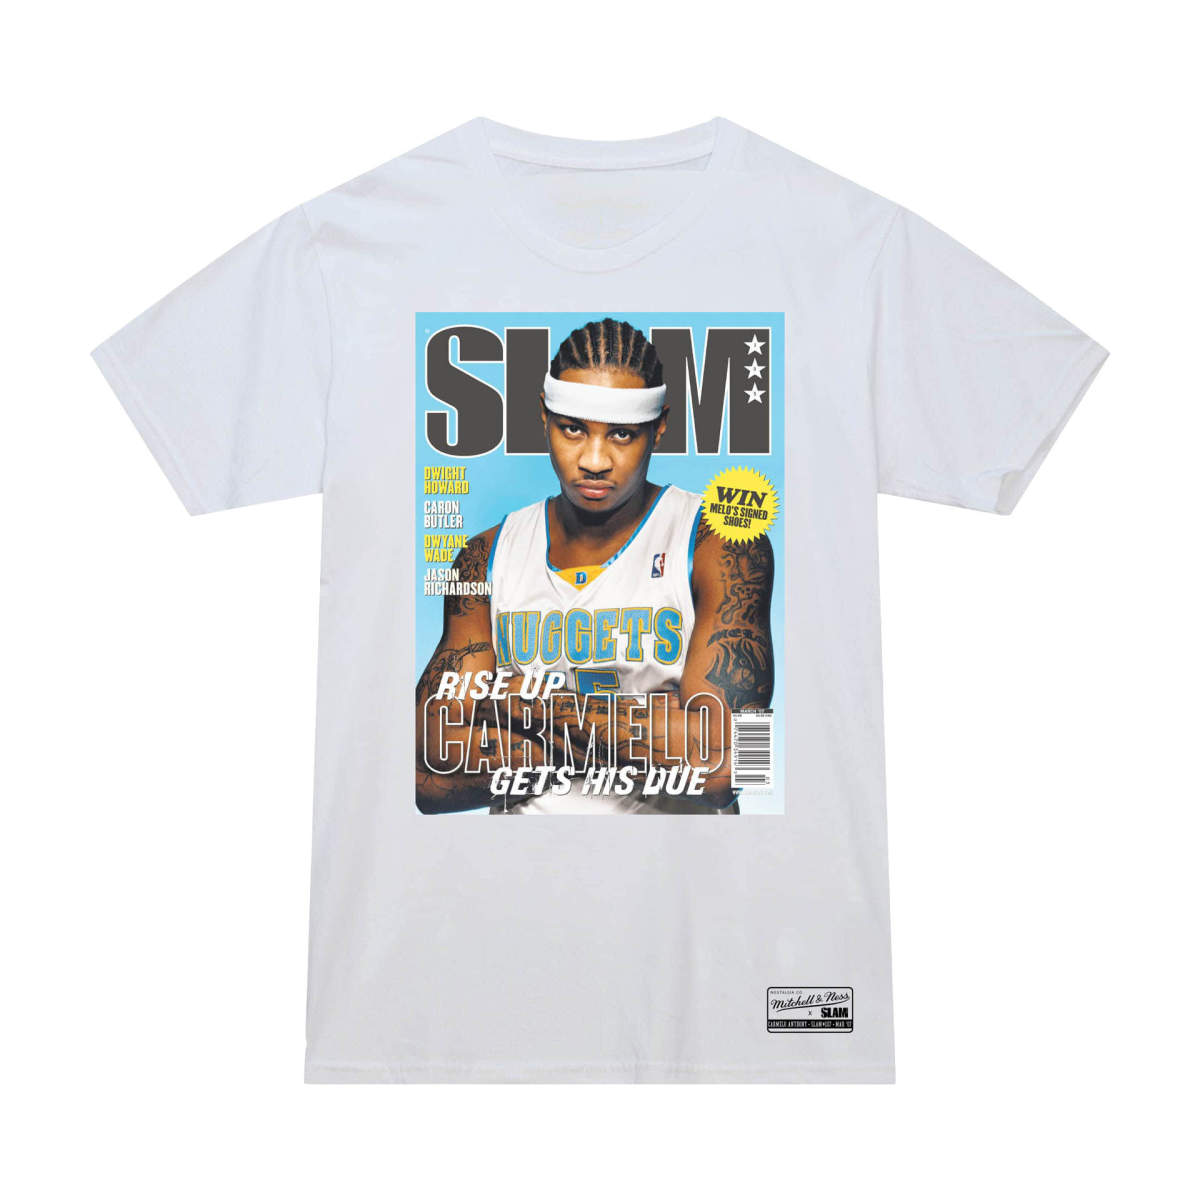 Denver nuggets slam cover tee anthony